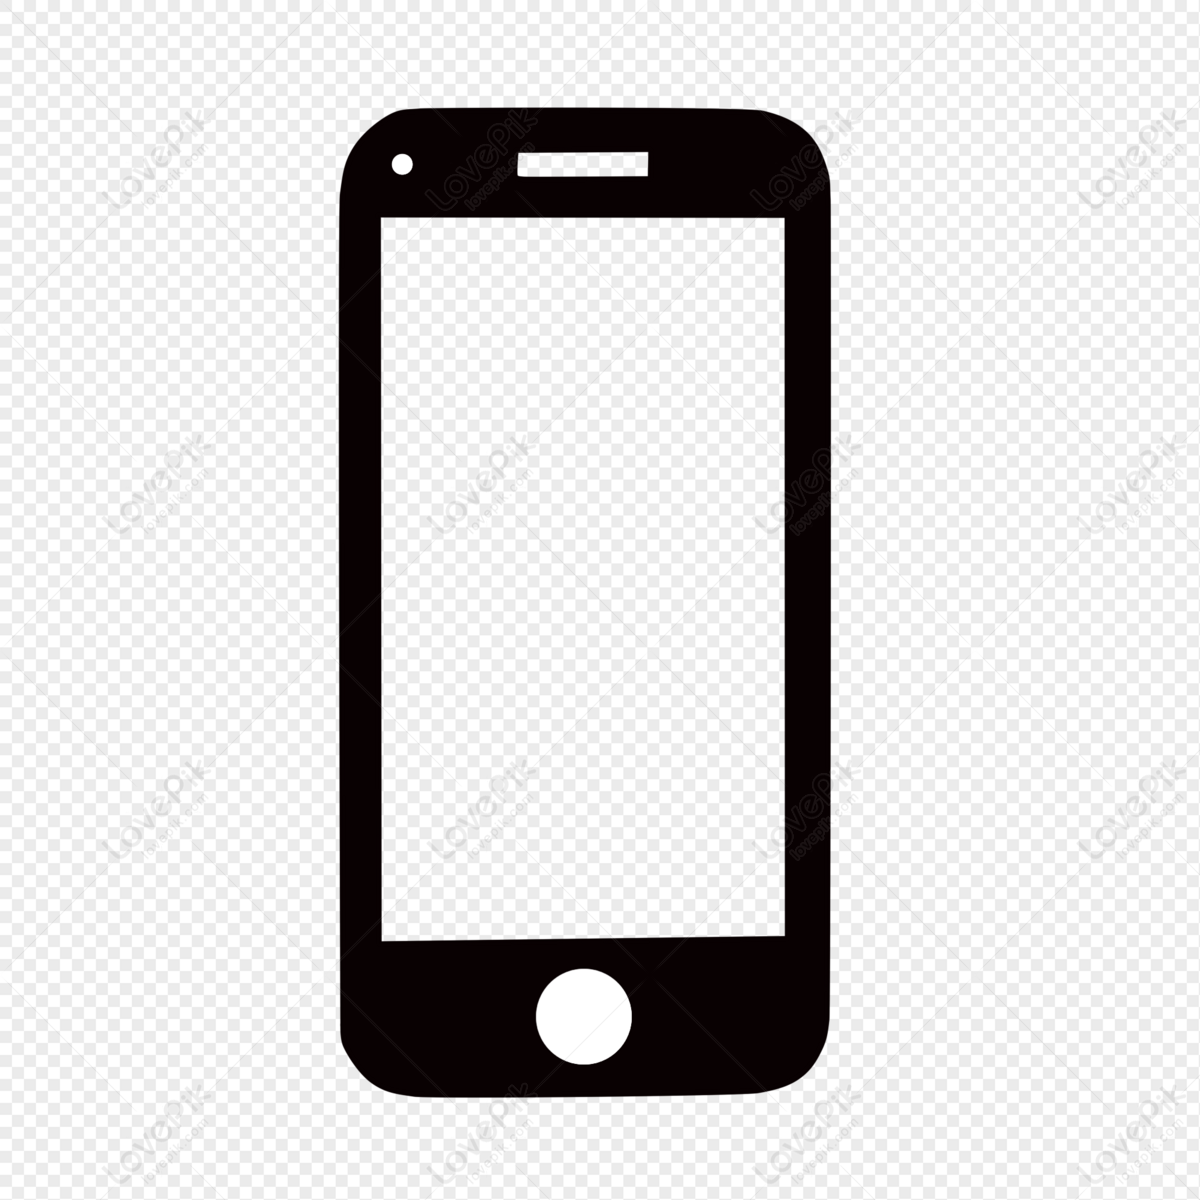 Mobile phone icon, mobile phone logo, phone icon, icon png white transparent